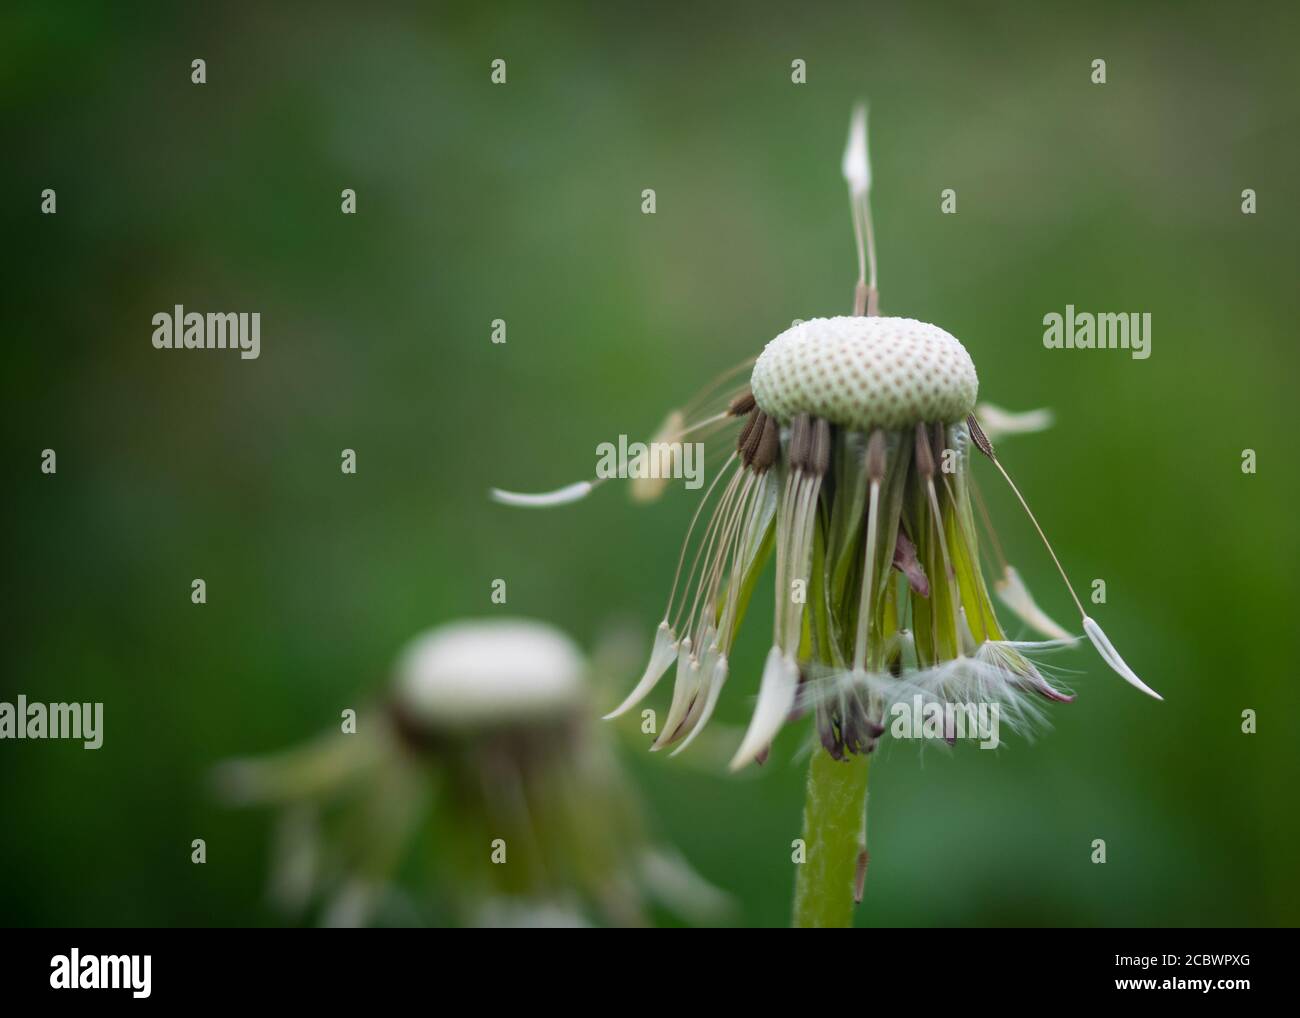 Single stem of the wild officinal plant of the dandelion, flower with seeds with the typical umbrella shape Stock Photo